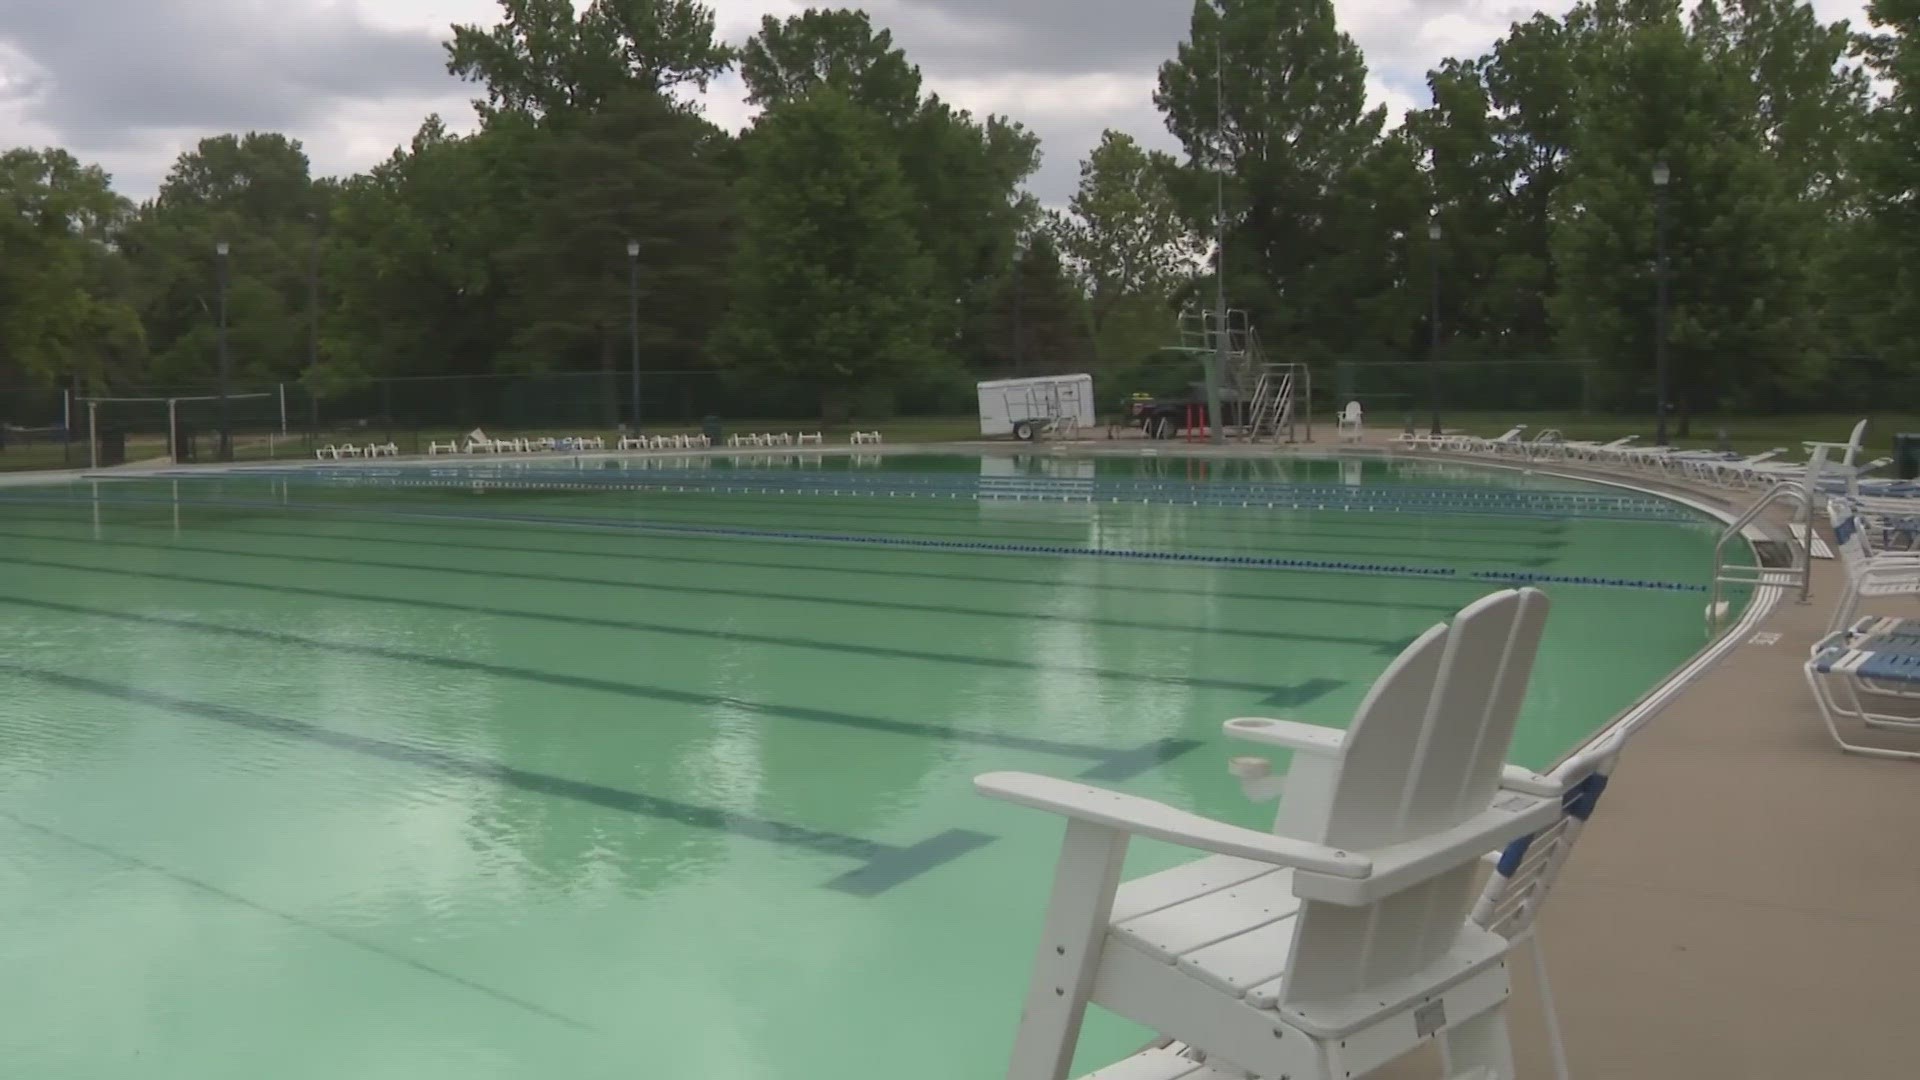 University City pool re-opens with some noticeably seasonal changes. One of those changes might a little bit of a nuisance.